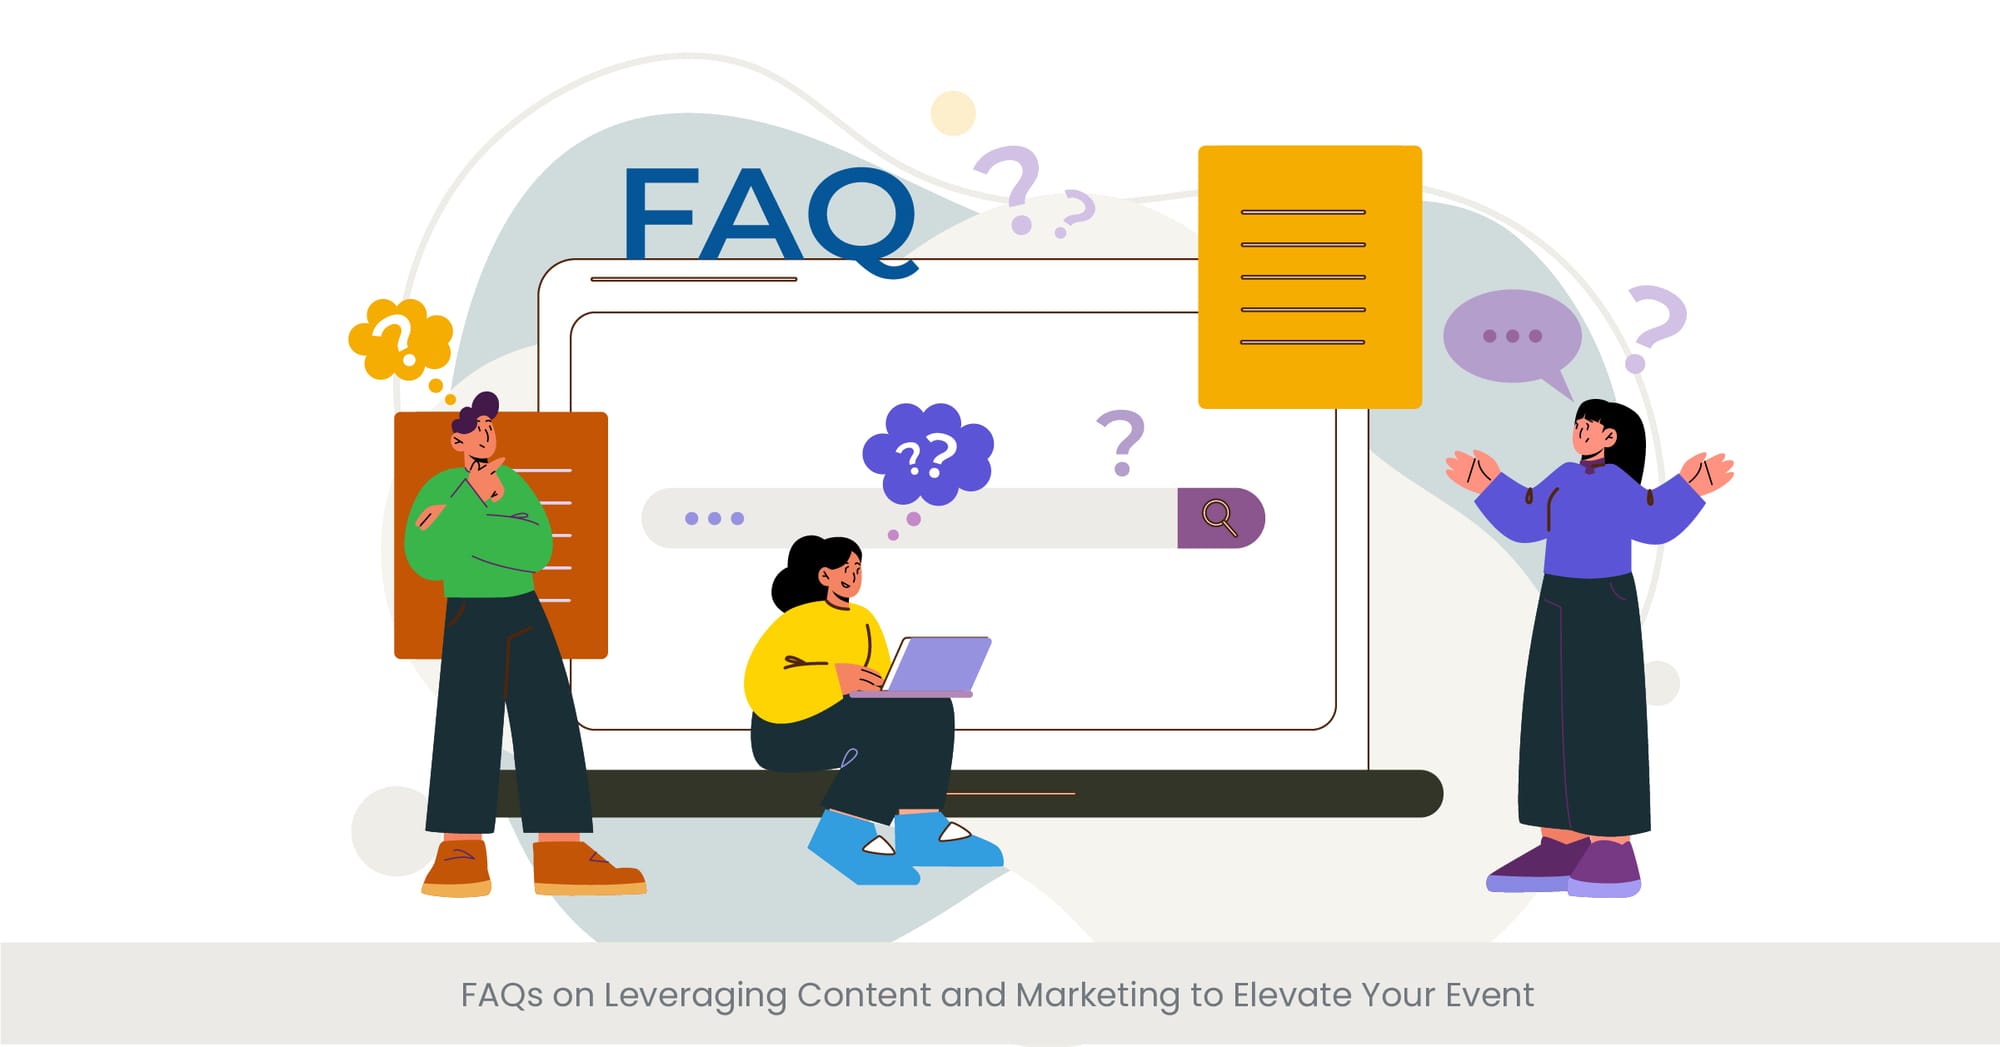 FAQs on Leveraging Content and Marketing to Elevate Your Event